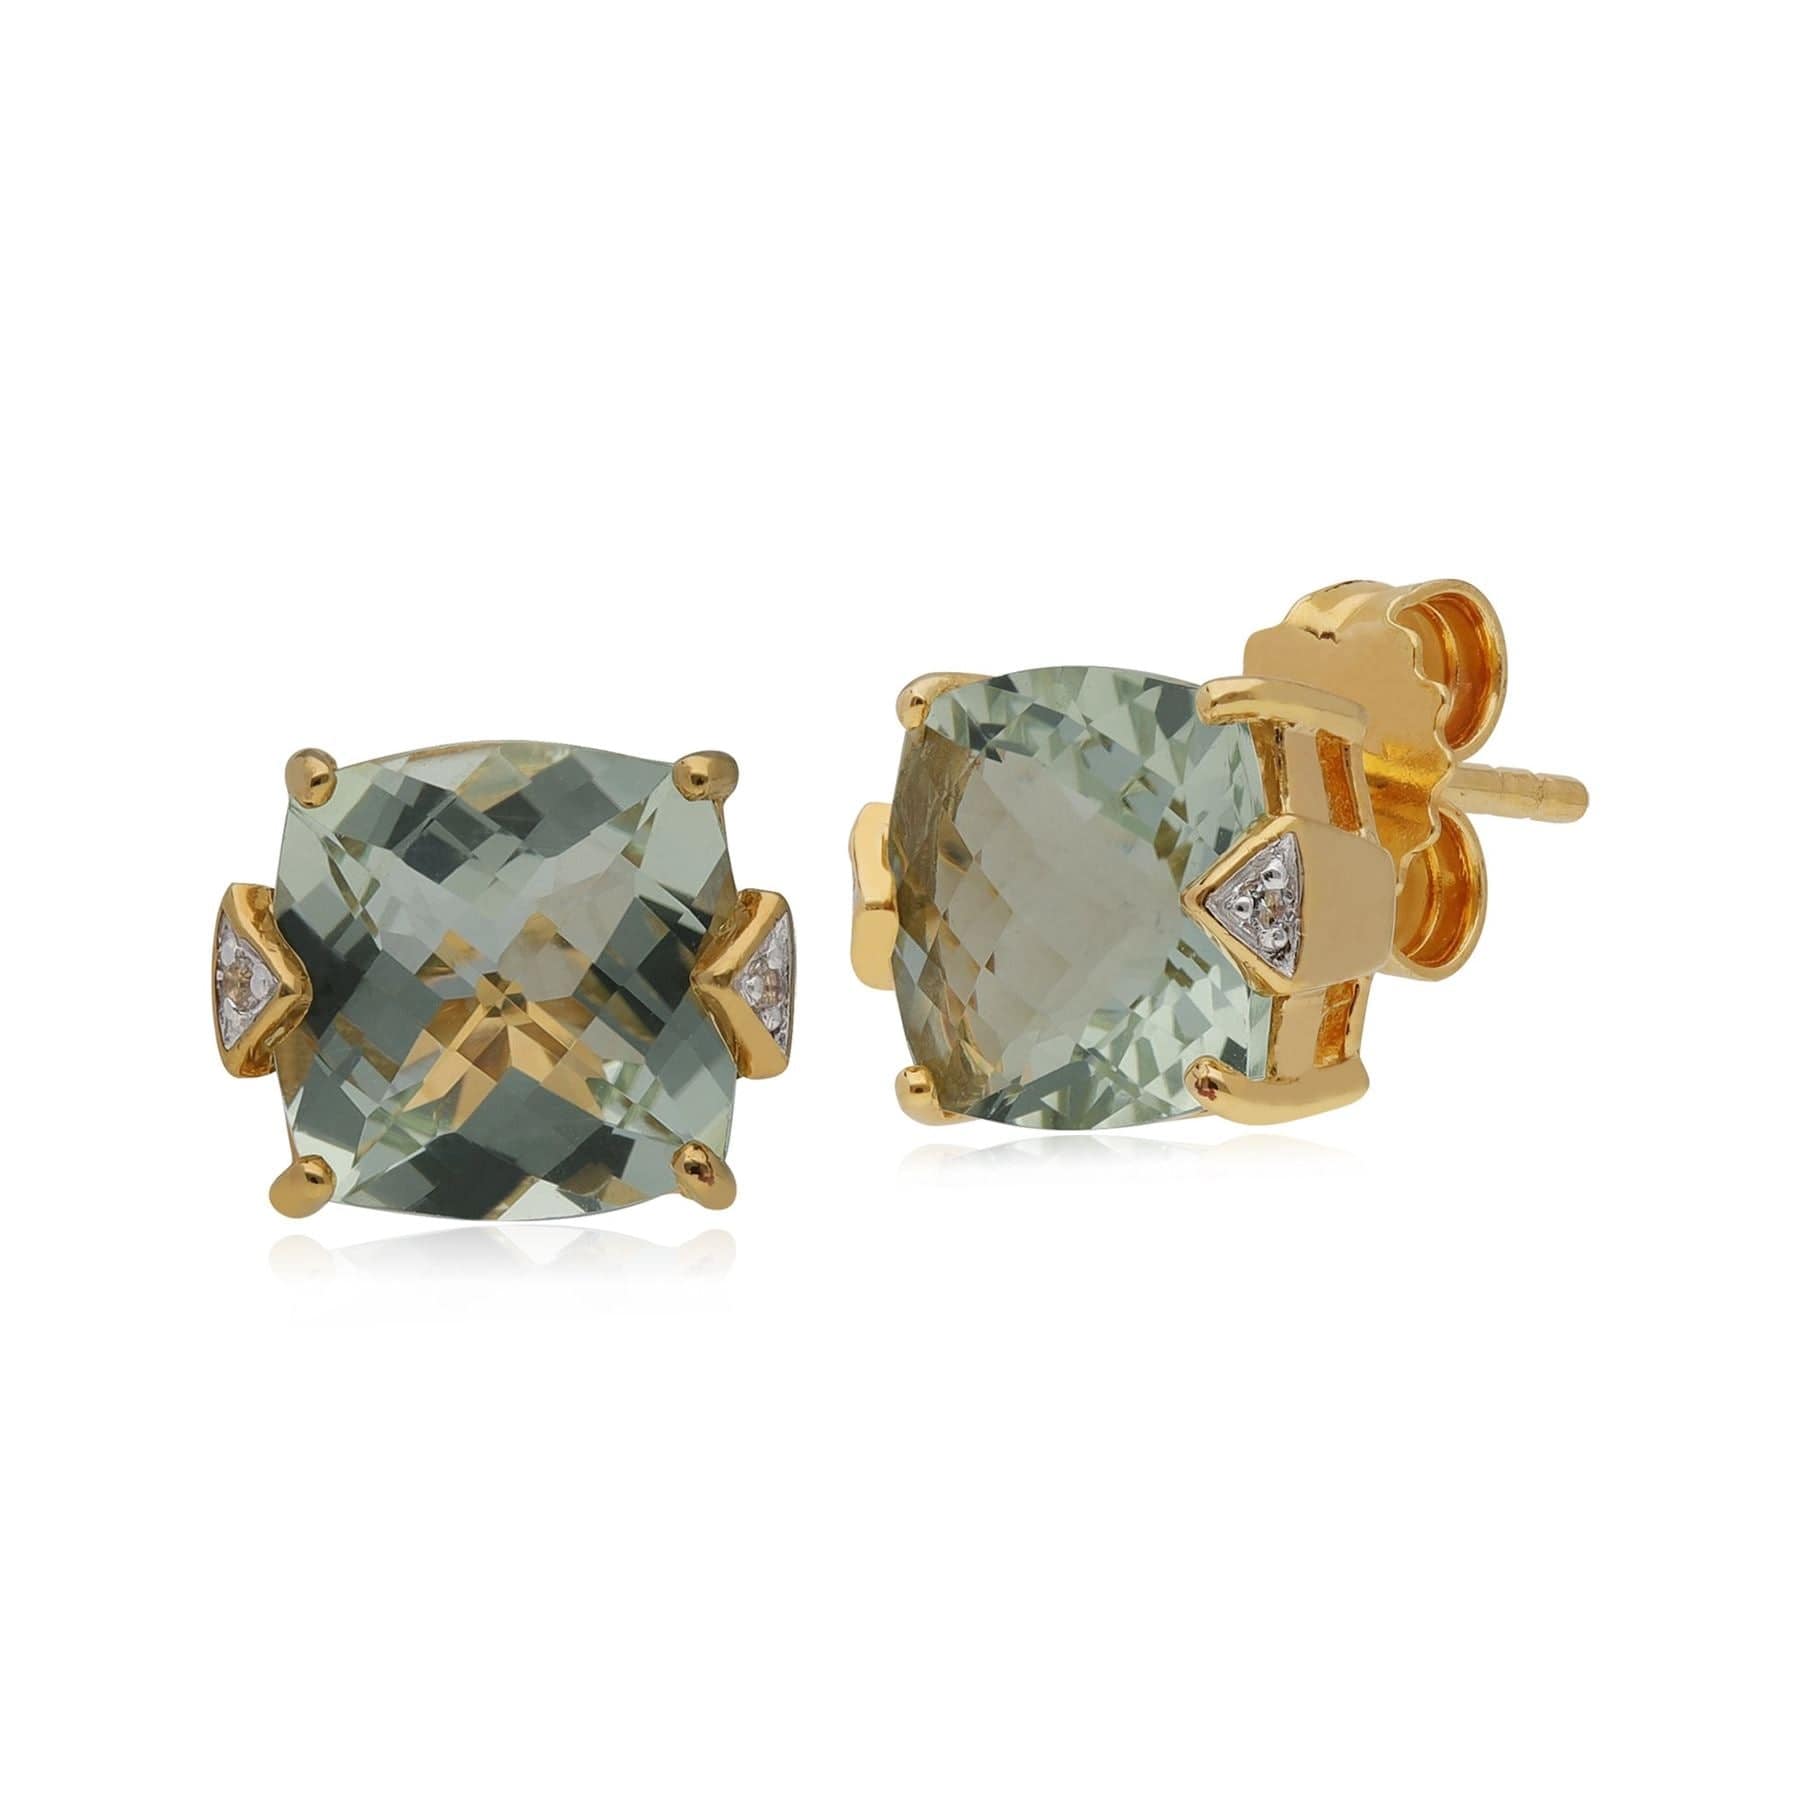 T1148E90T0 Kosmos Green Mint Quartz & Topaz Stud Earrings in Rose Gold Plated Sterling Silver 1